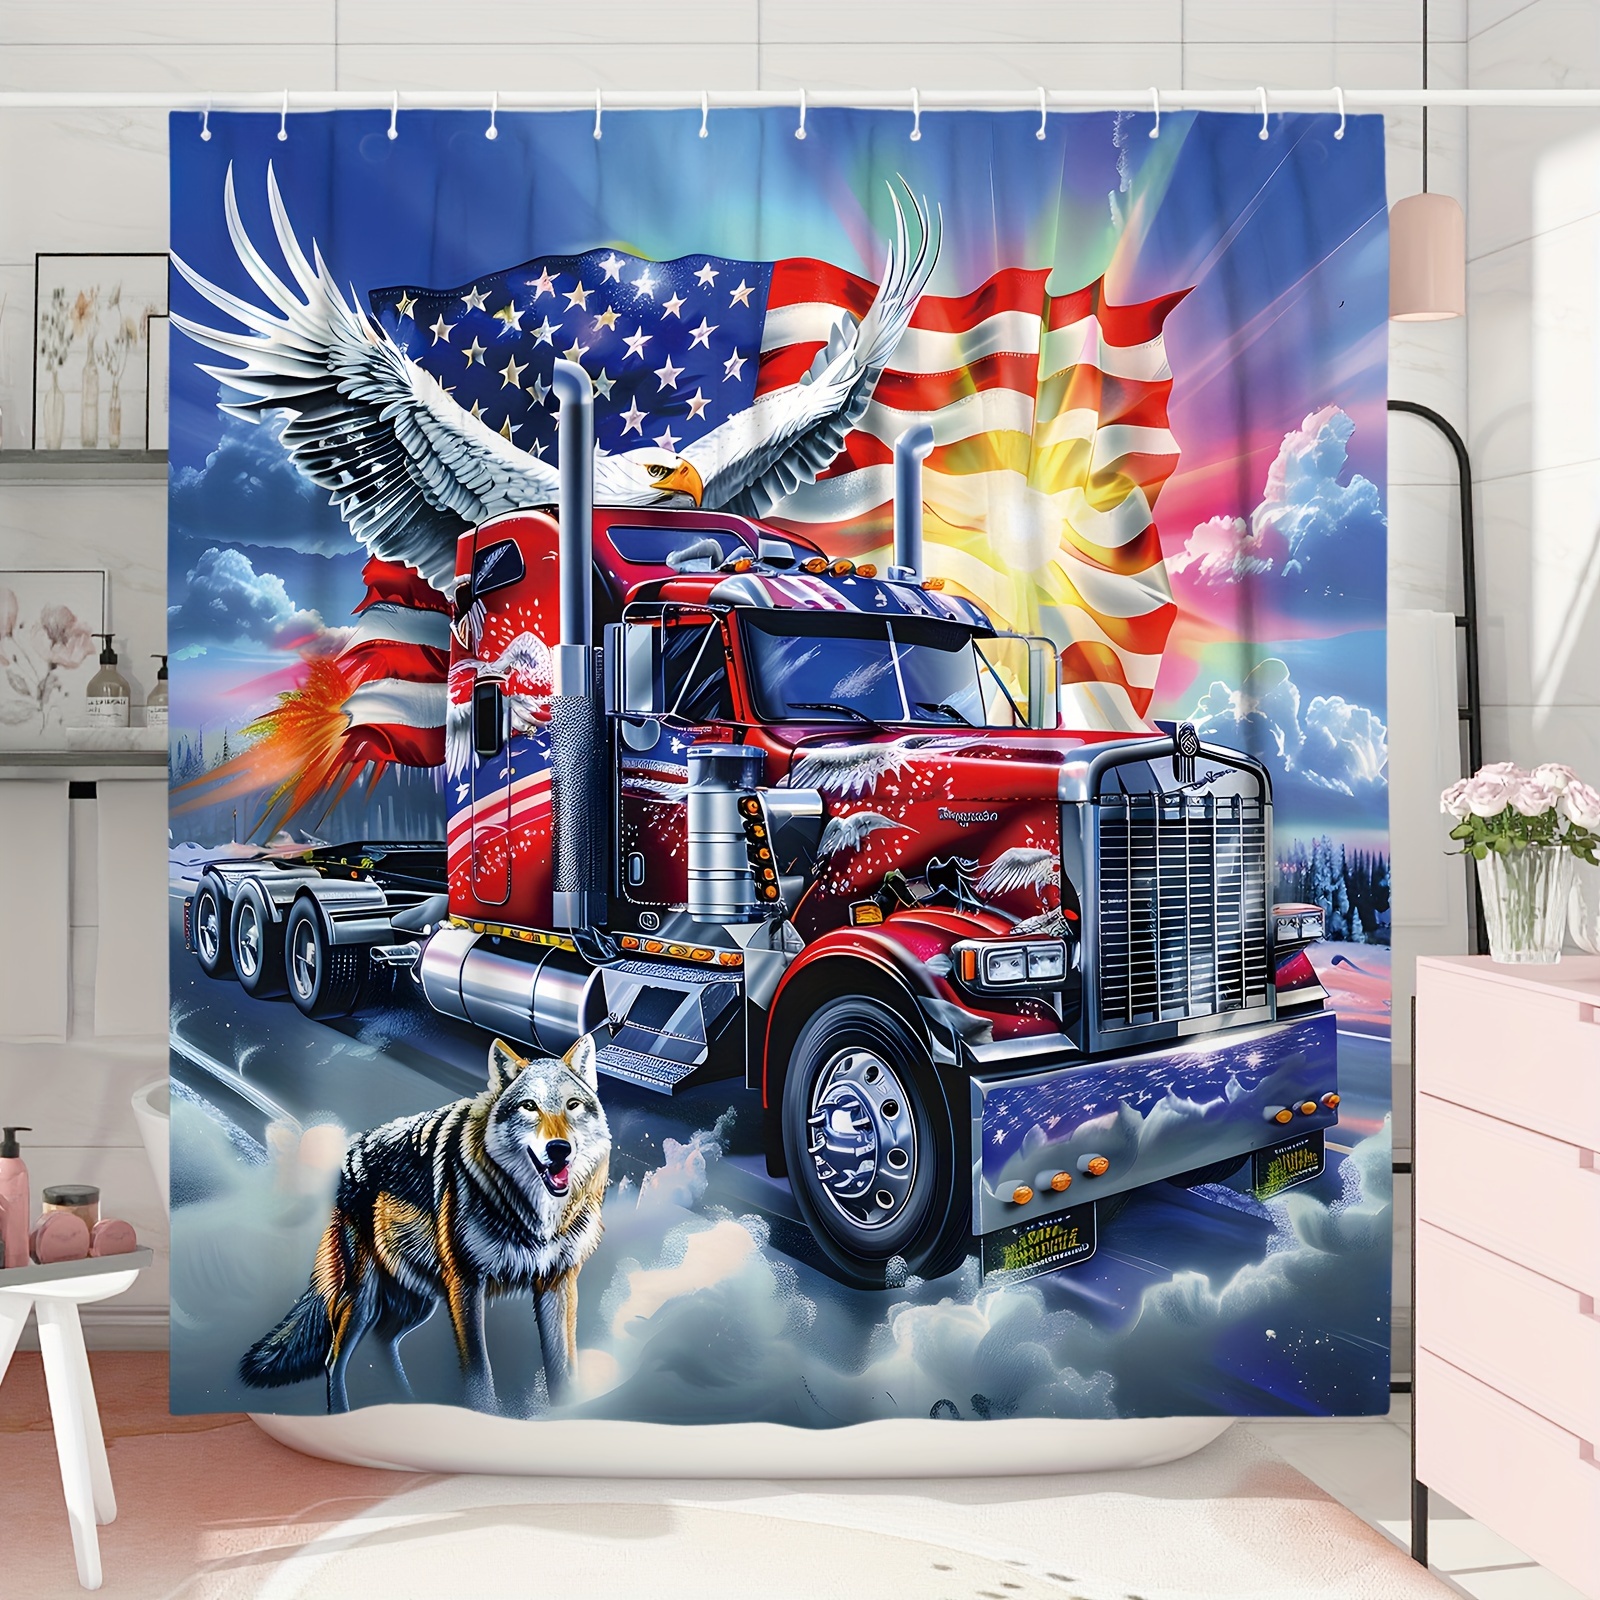 

American Flag Eagle & Truck Polyester Shower Curtain With Animal Print - Patriotic Independence Day Decor, Water-resistant, Unlined, Includes Hooks, All-season, Woven, Machine Washable - 71x71 Inch